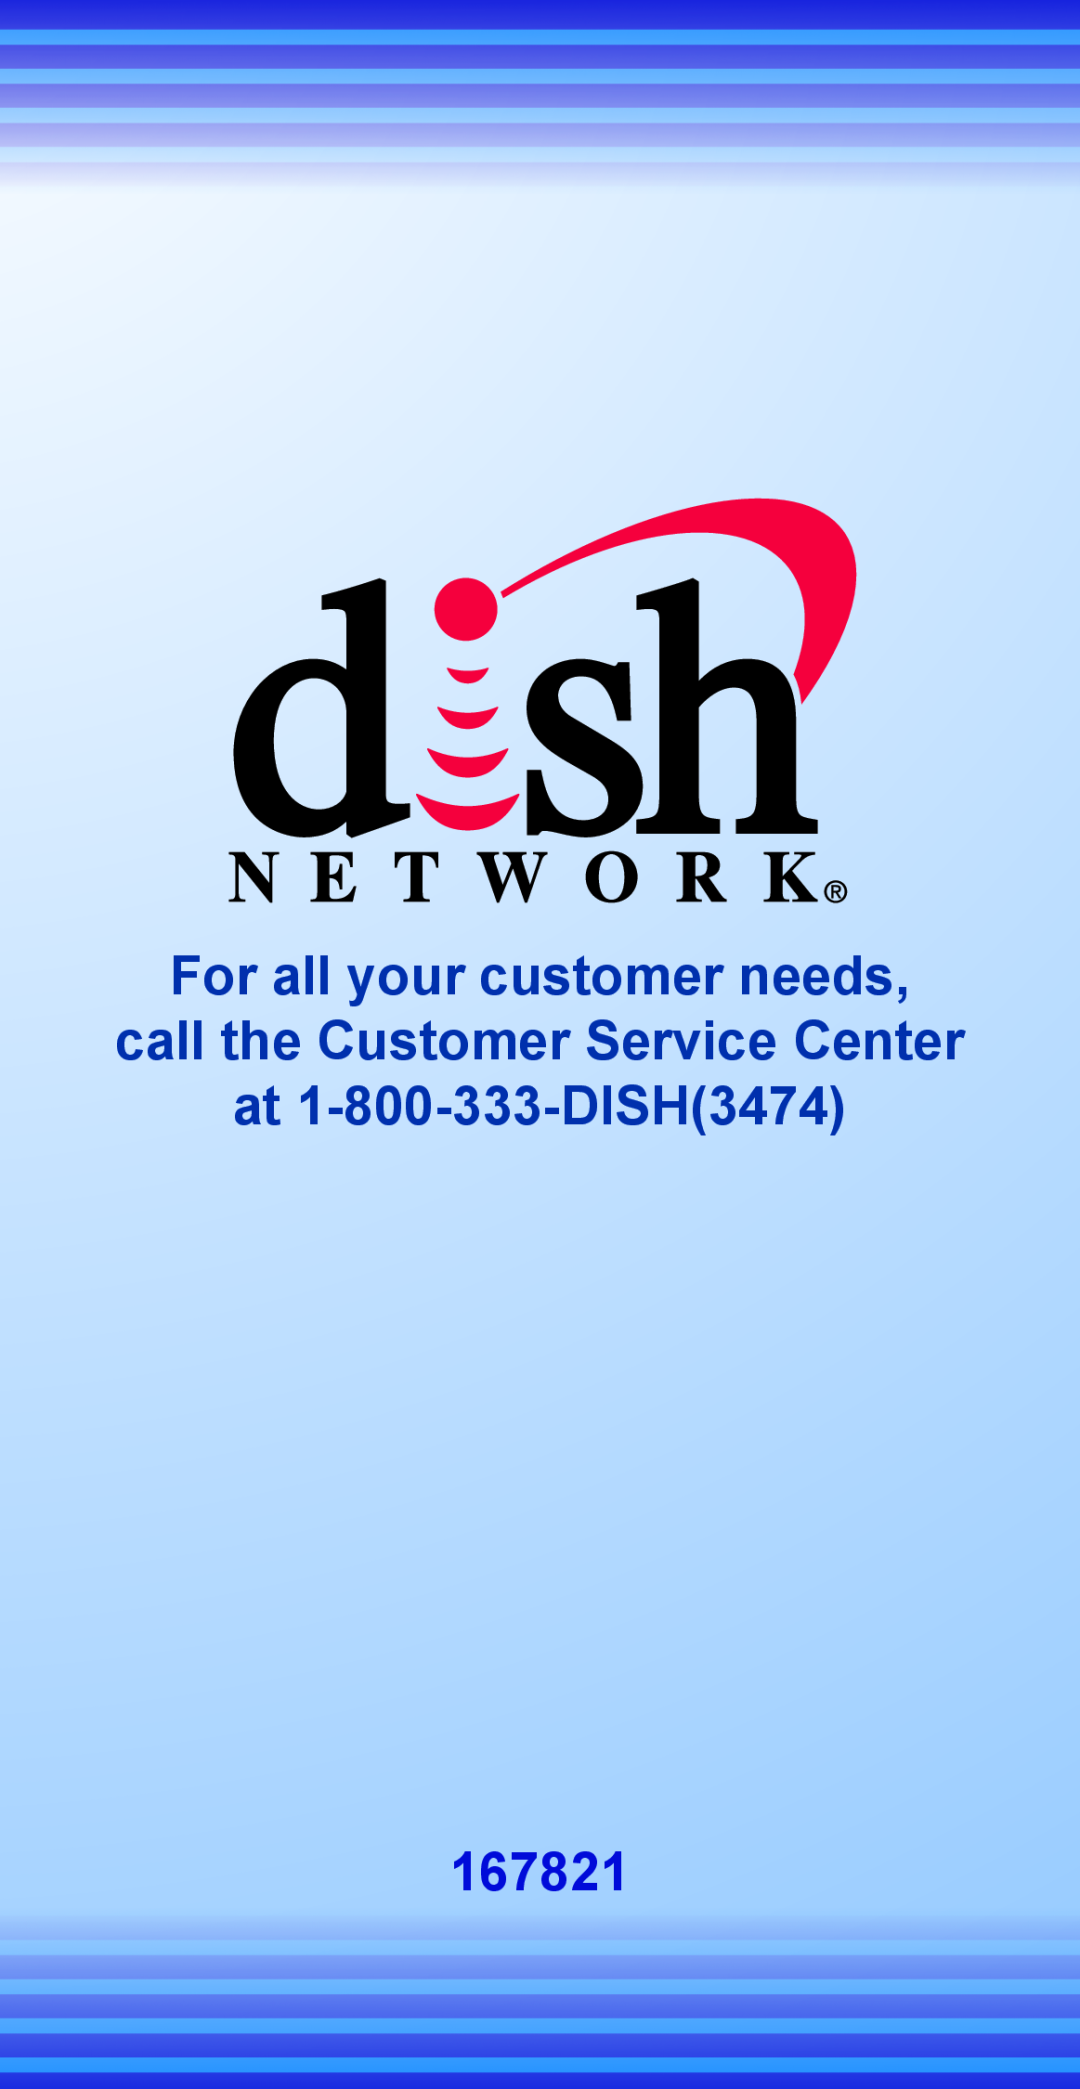 Univex 5.4 manual For all your customer needs call the Customer Service Center, at 1-800-333-DISH3474, 167821 